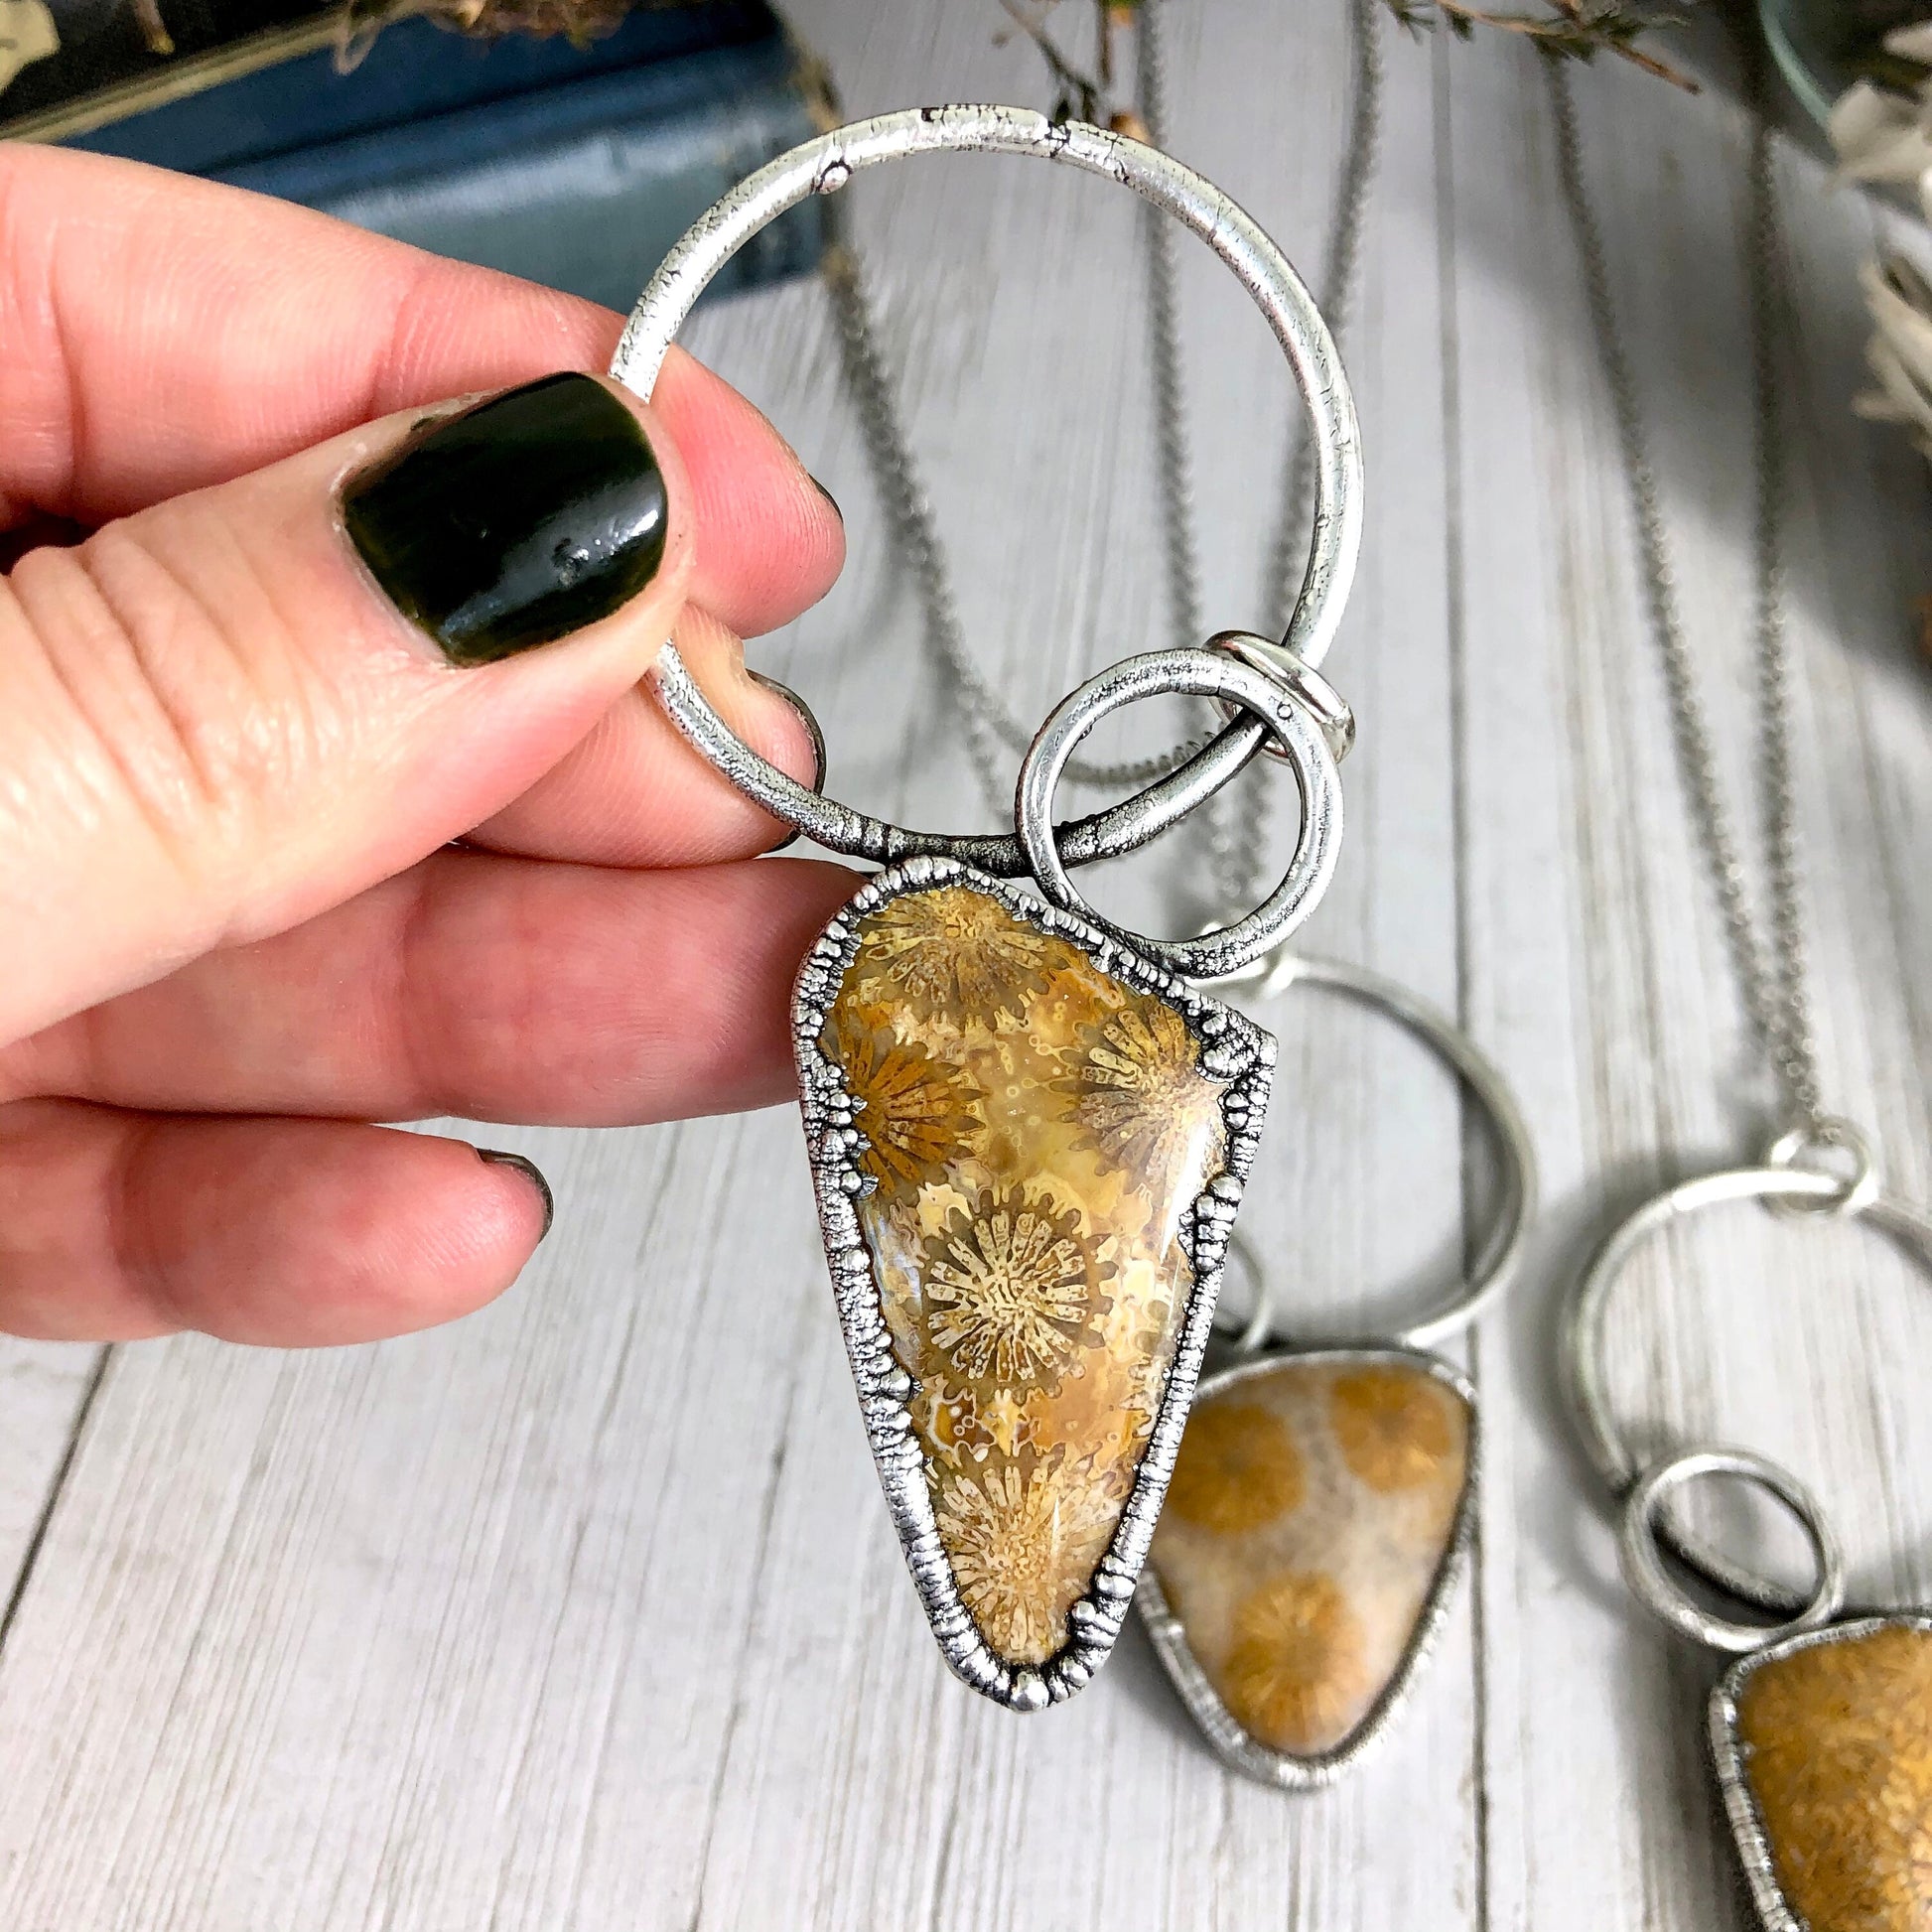 Bohemian Fashion, Bohemian Jewelry, Crystal Jewelry, Crystal Necklace, Crystal Necklaces, Crystal pendant, Etsy ID: 1100808239, Fossilized Coral, FOXLARK- NECKLACES, Gift for her, Healing Crystal, Jewelry, Jewelry For Woman, Necklaces, sale, Silver Jewelr